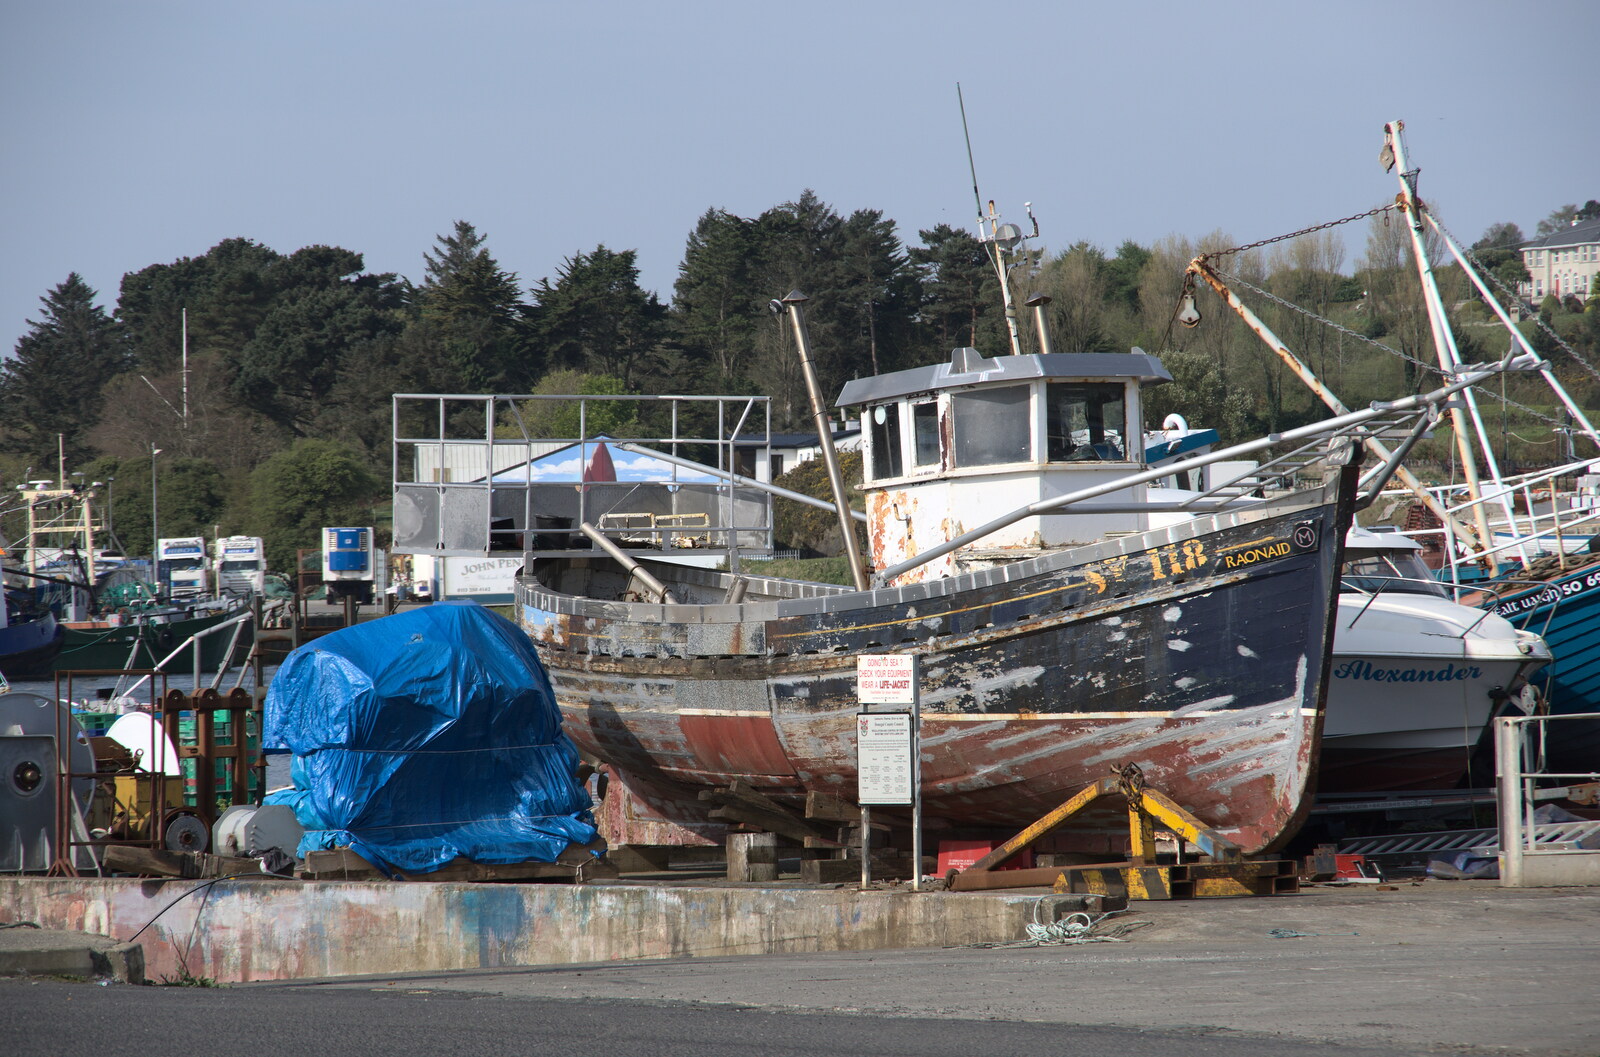 Greencastle, Doagh and Malin Head, County Donegal, Ireland - 19th April 2022: A boat is being restored